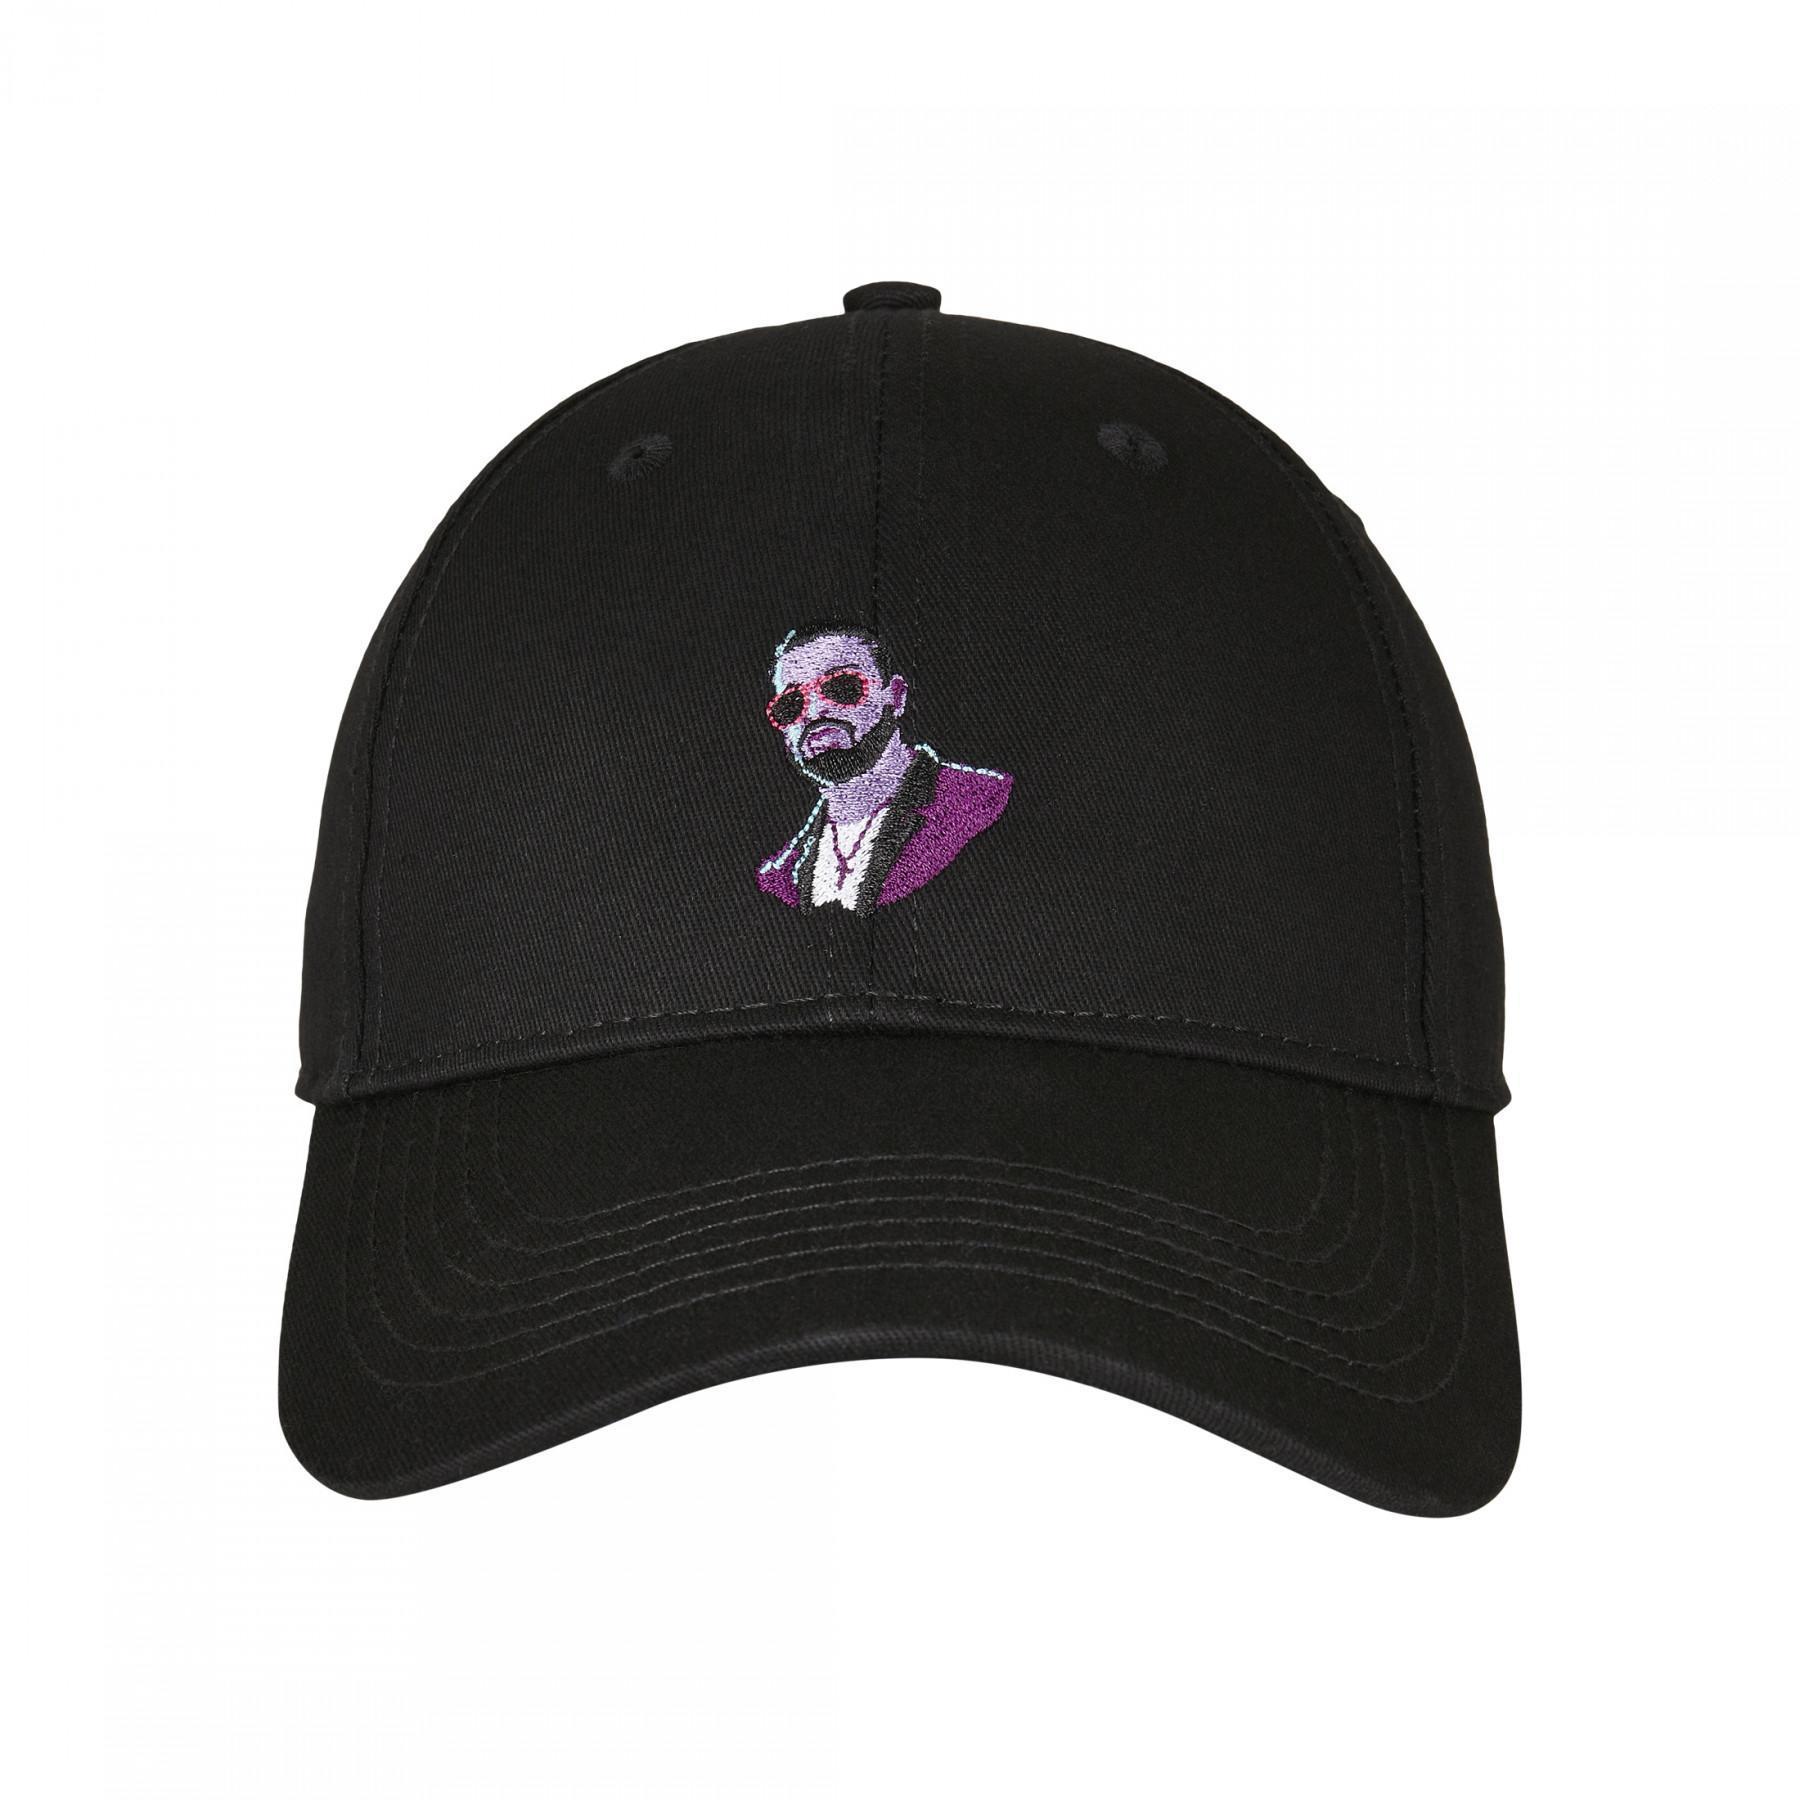 Gorra Cayler & Sons mia papi curved